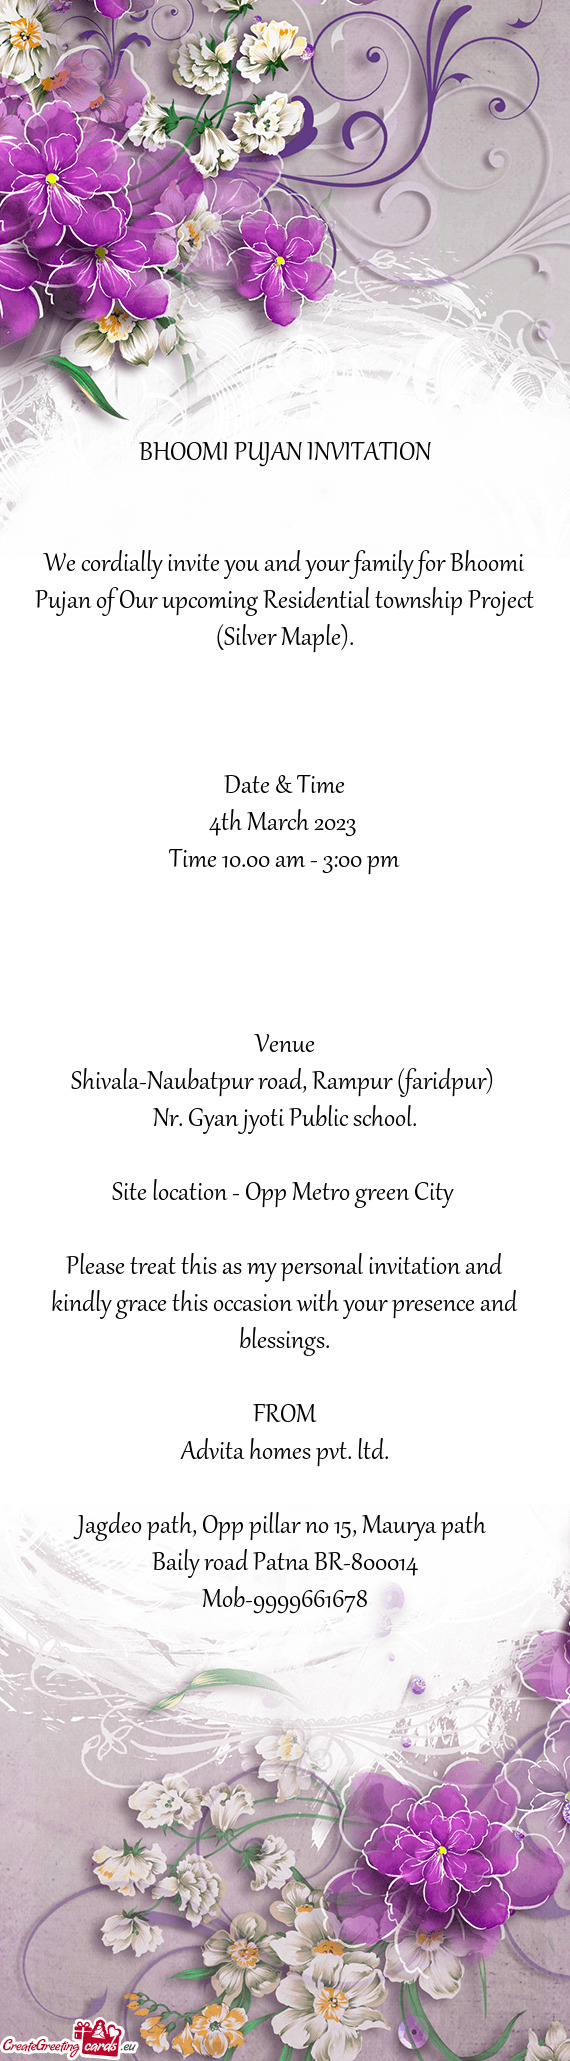 We cordially invite you and your family for Bhoomi Pujan of Our upcoming Residential township Projec